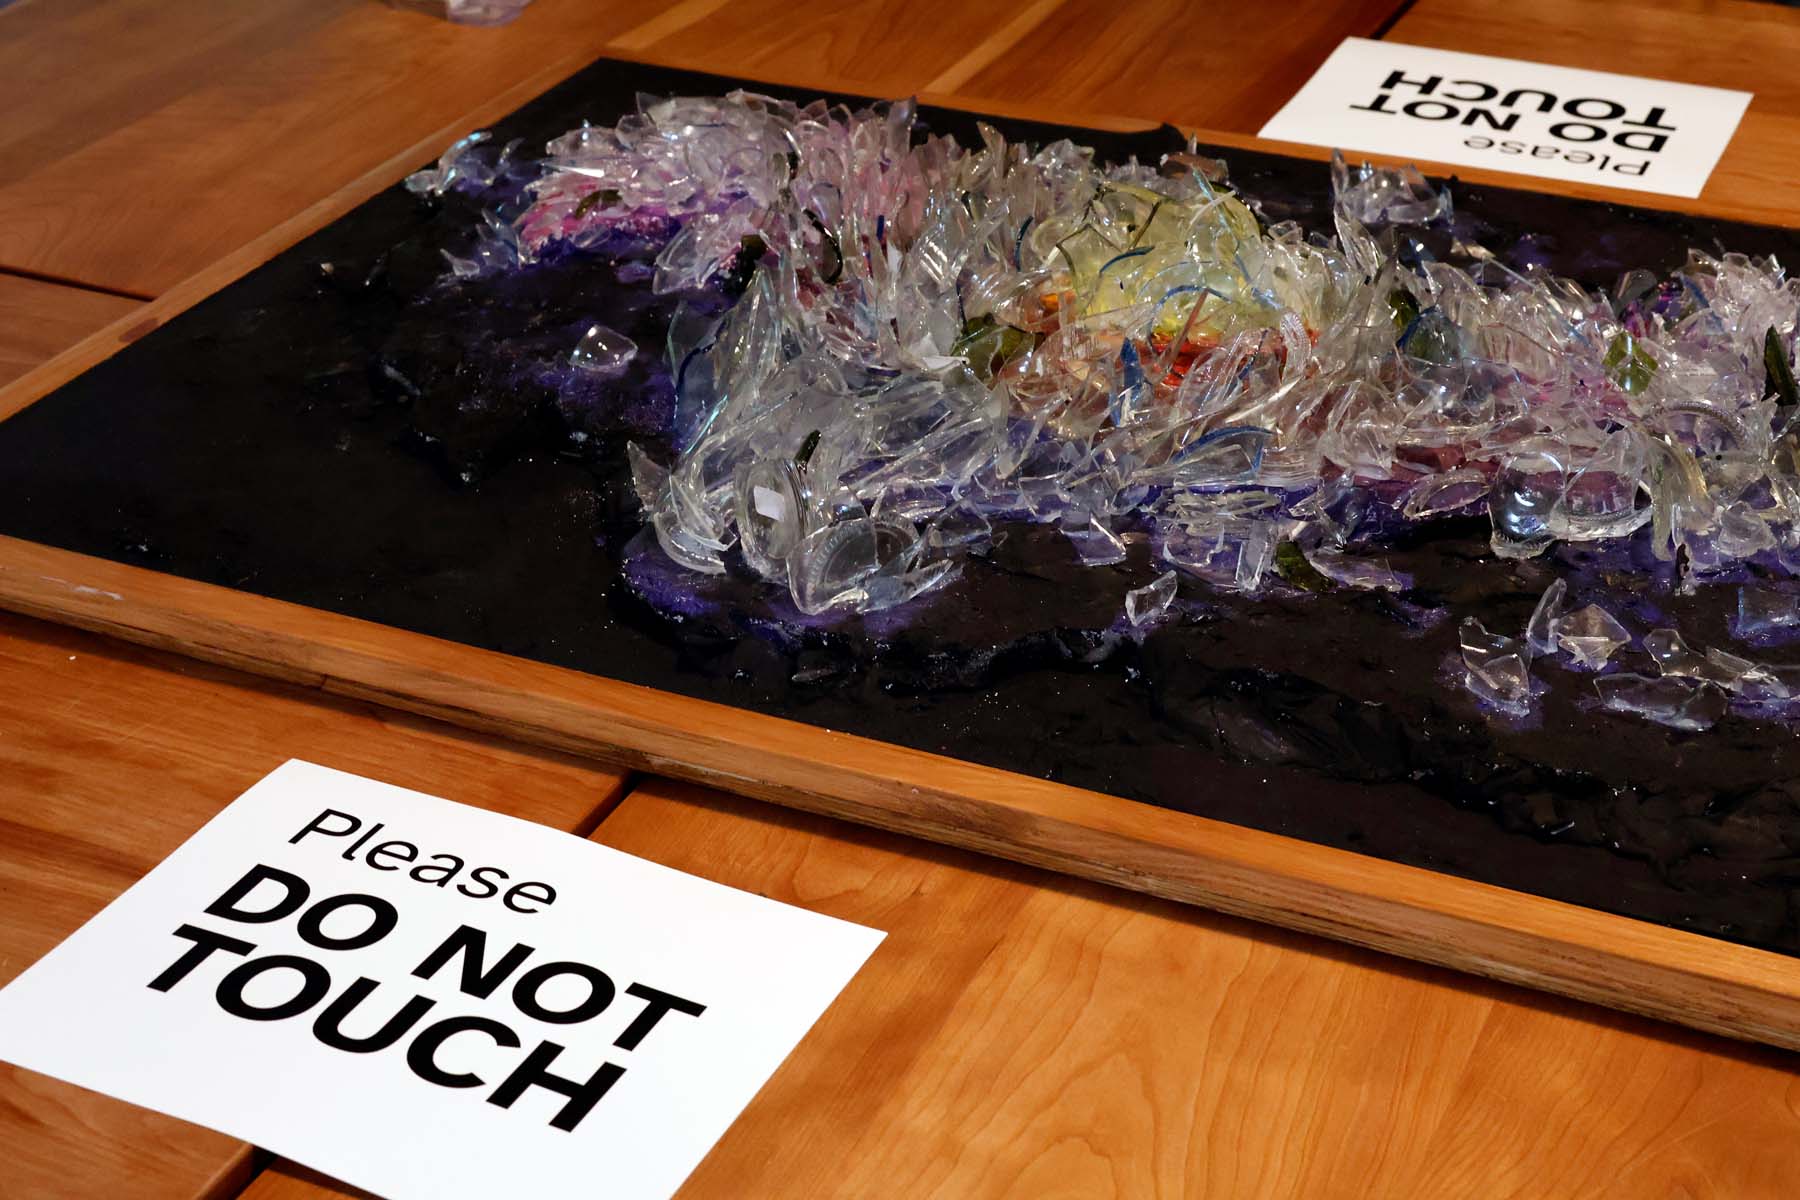 Glass galaxy relief sculpture from slightly above, sitting on a wooden table with a label "Please DO NOT TOUCH".